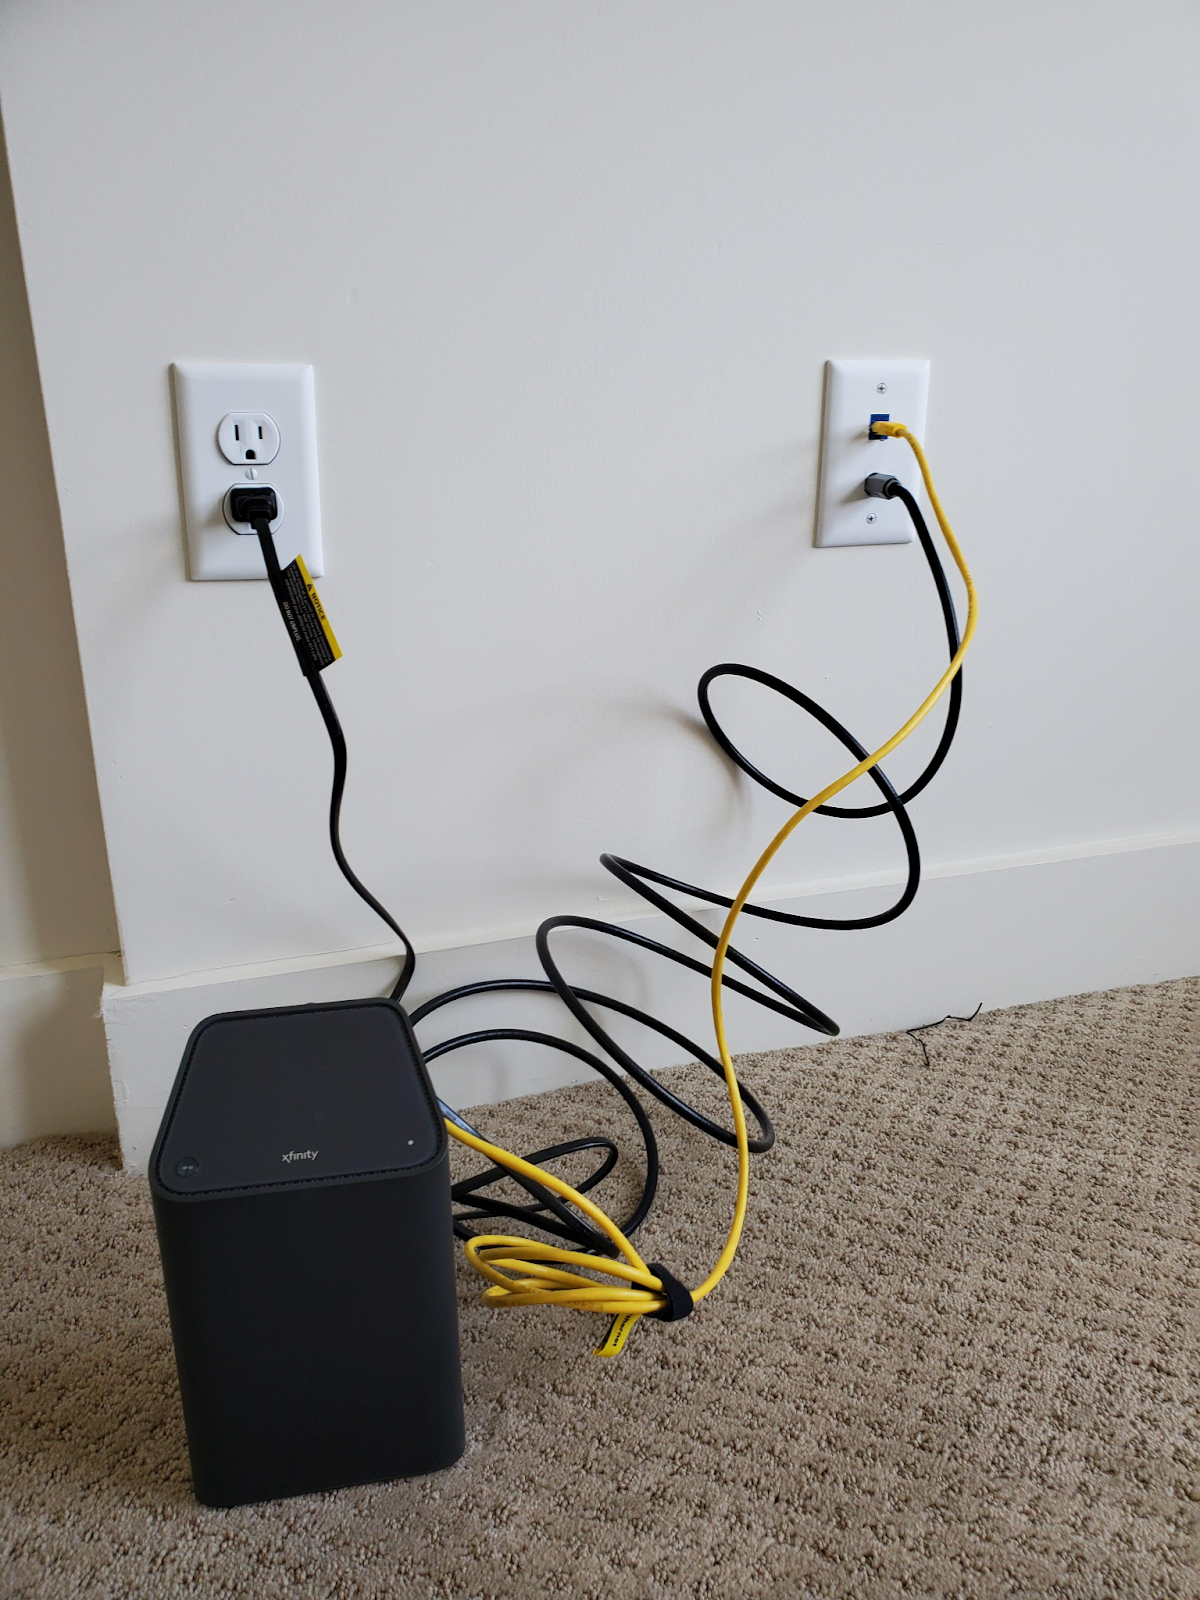 check Xfinity Gateway cables and connections